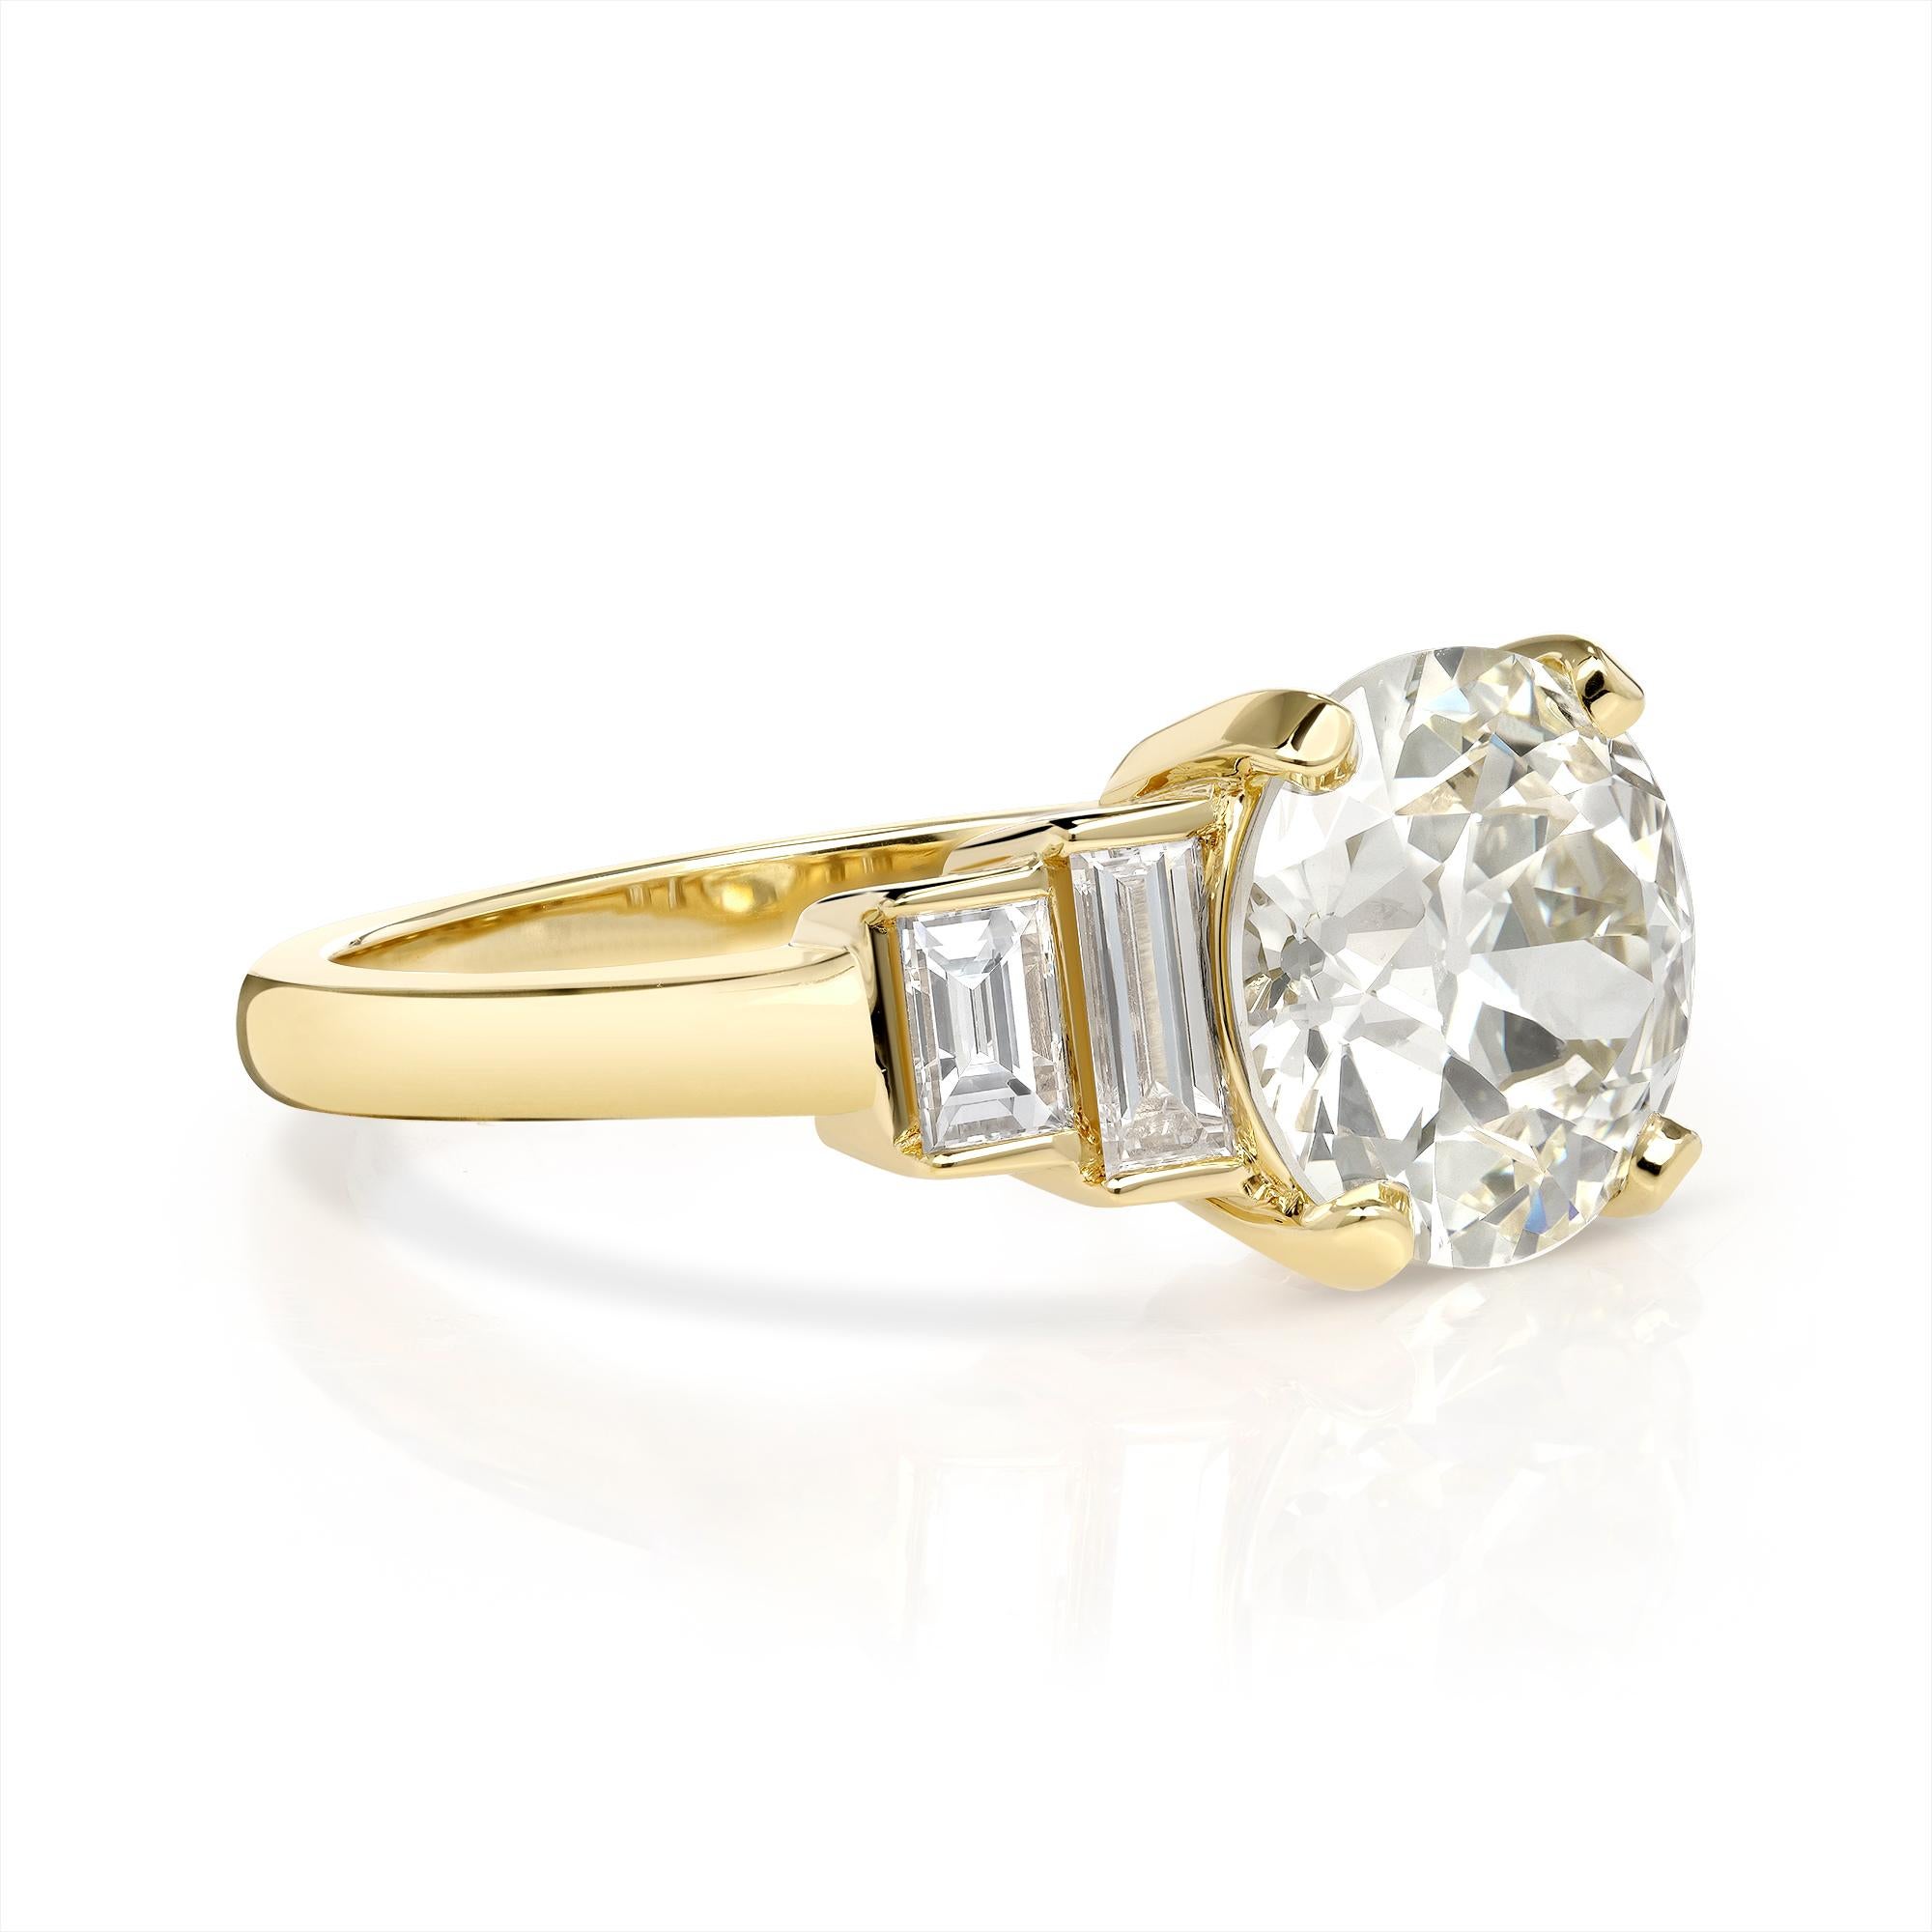 2.54ct N/VS1 GIA certified old European cut diamond with 0.46ctw baguette cut accent diamonds prong set in a handcrafted 18K yellow gold mounting. 